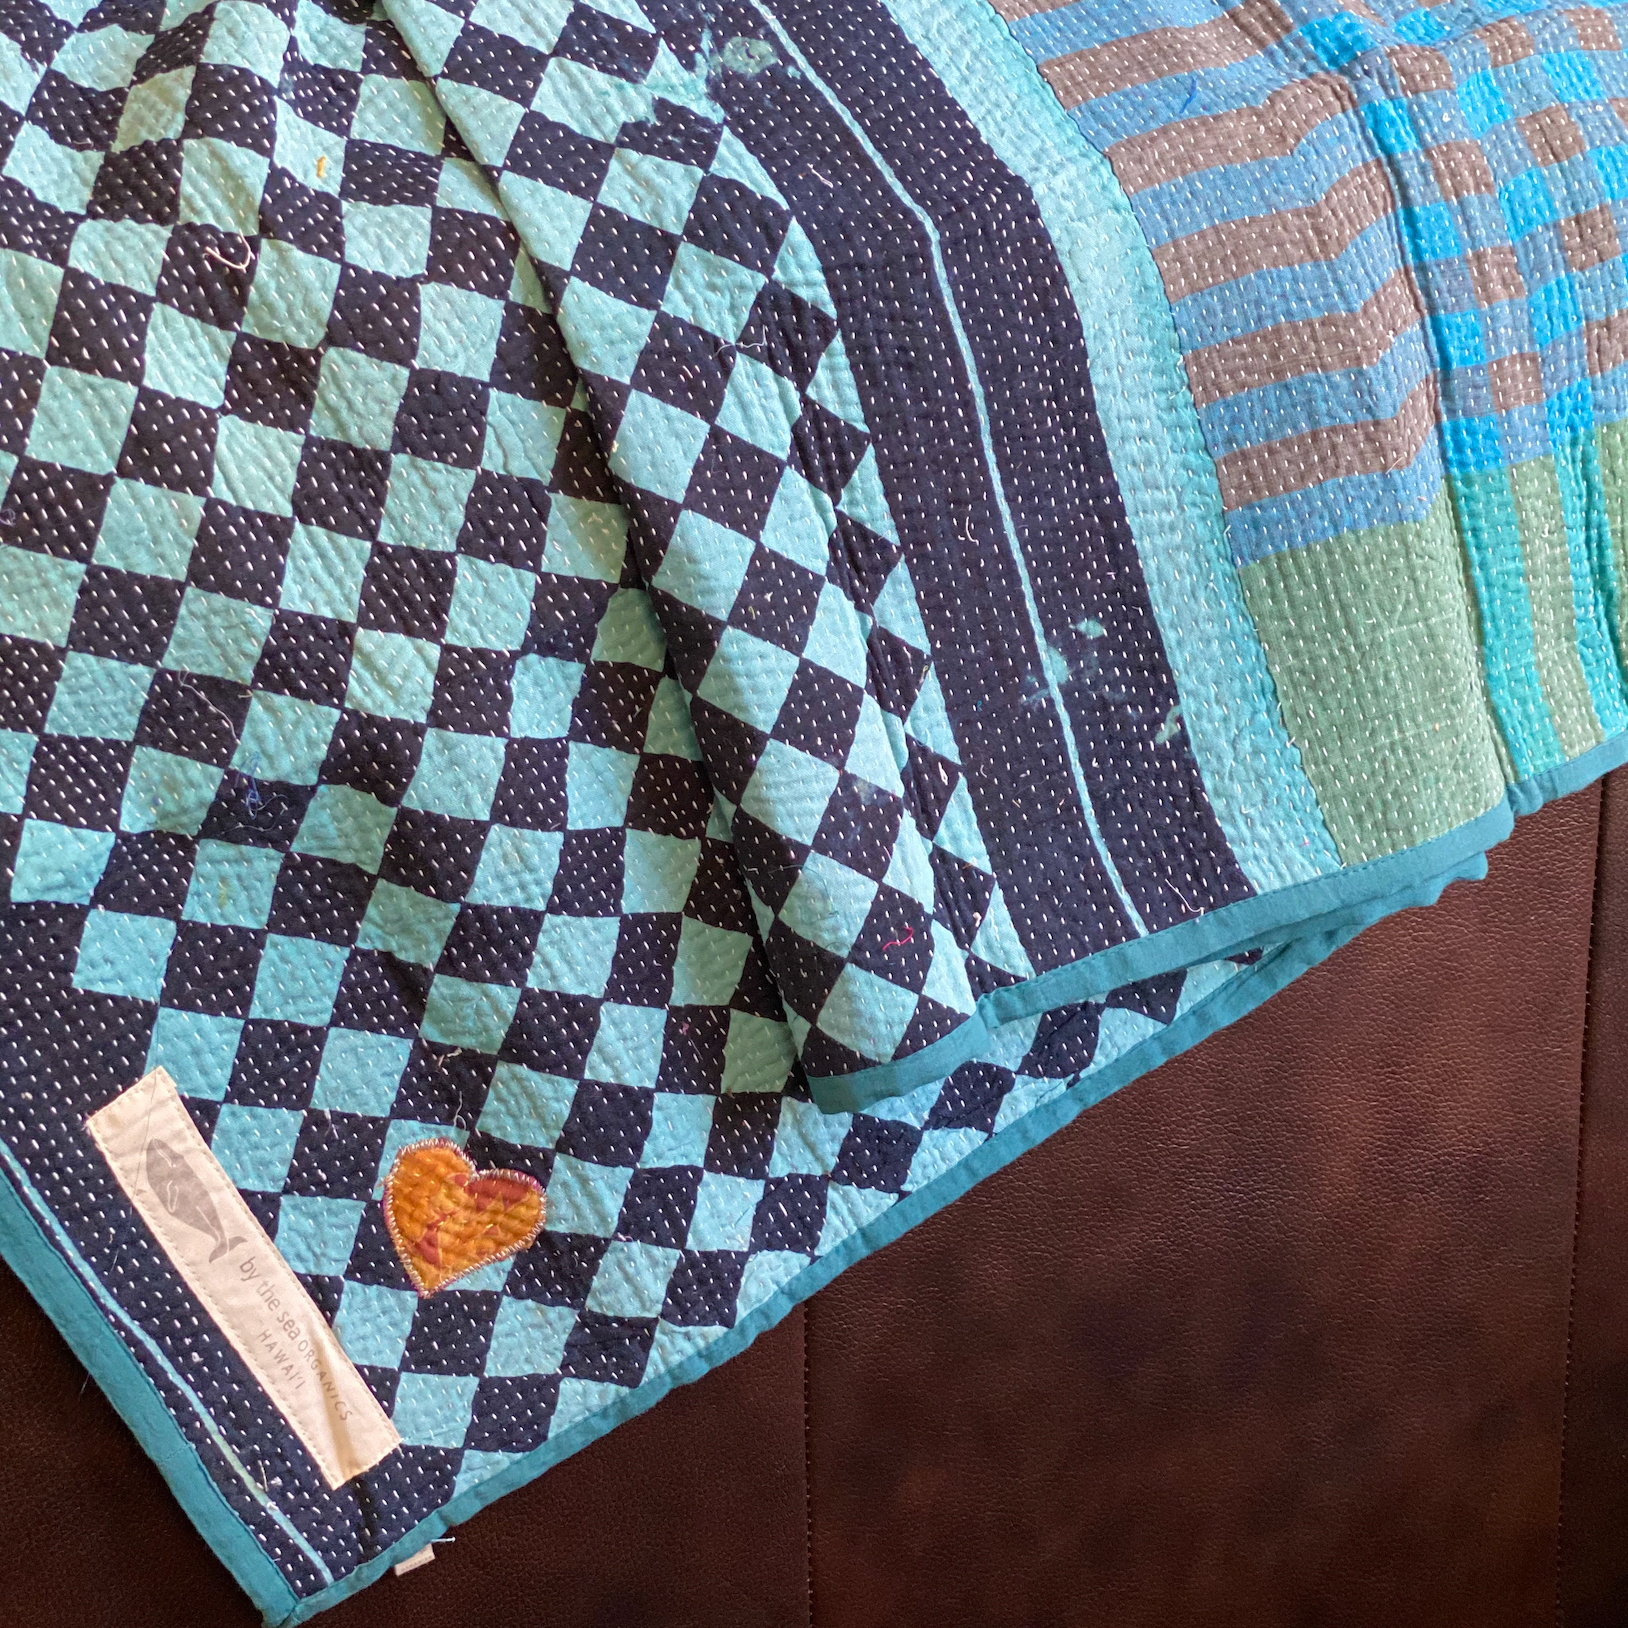 Kantha personal quilt in aqua check pattern.